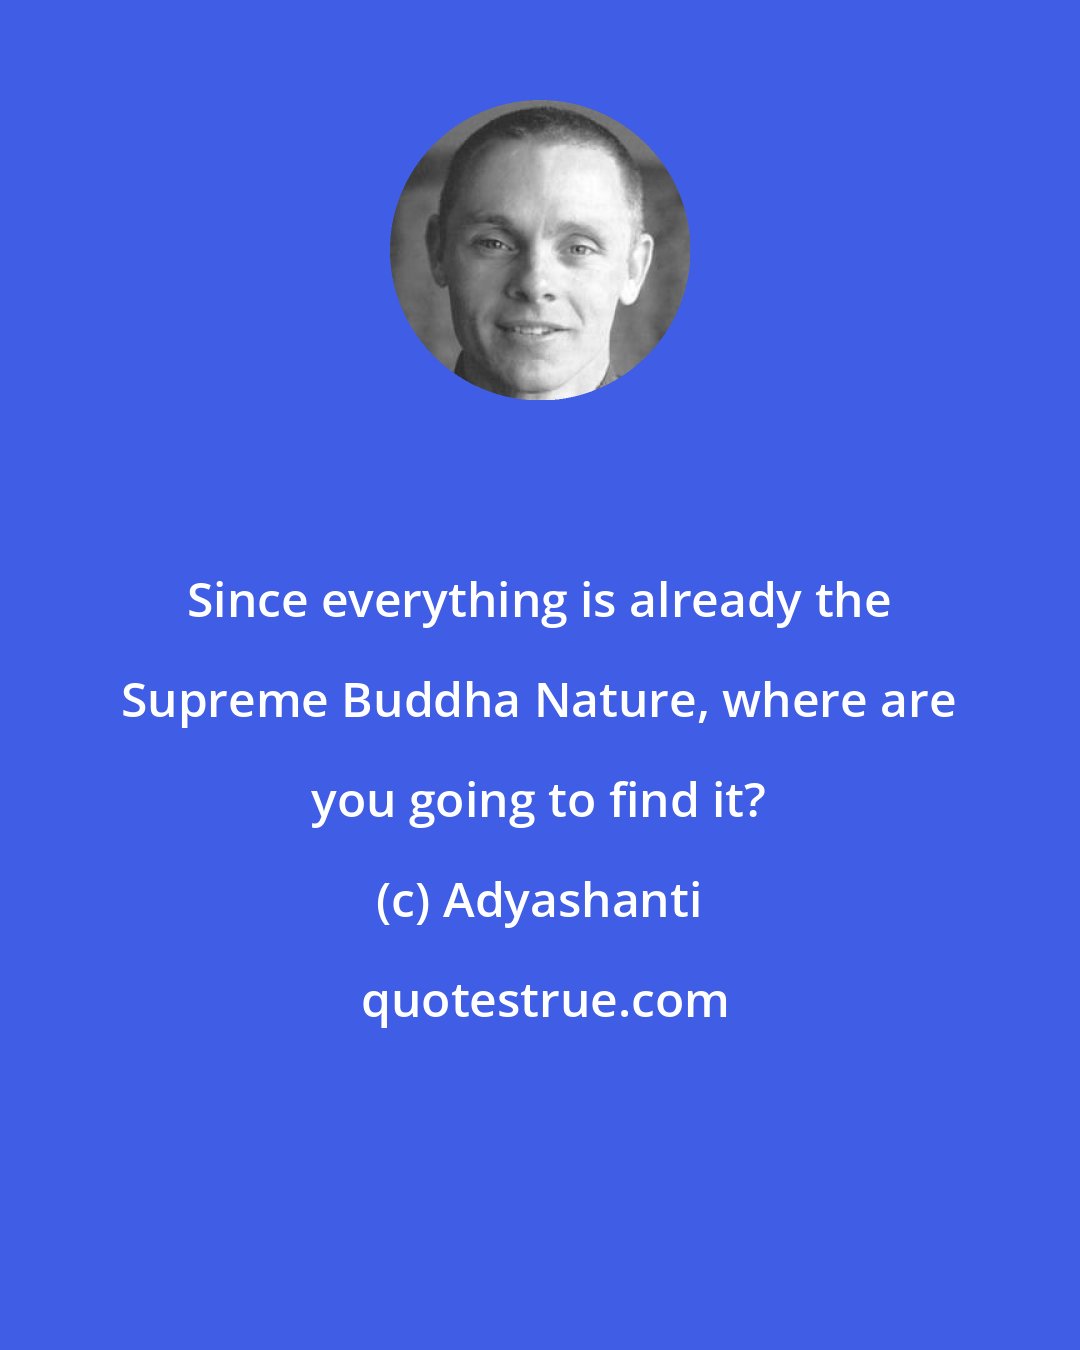 Adyashanti: Since everything is already the Supreme Buddha Nature, where are you going to find it?